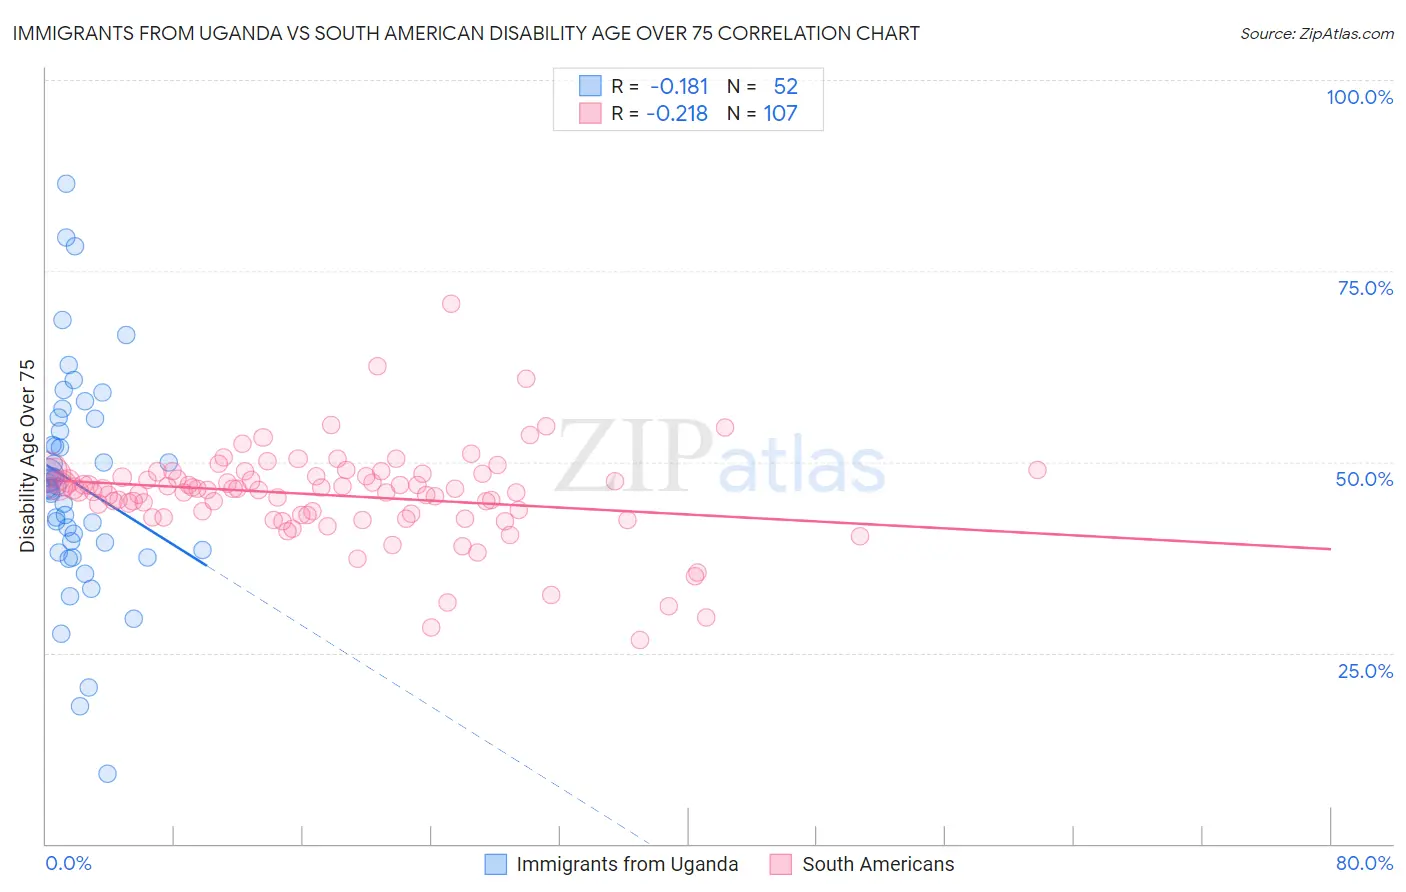 Immigrants from Uganda vs South American Disability Age Over 75